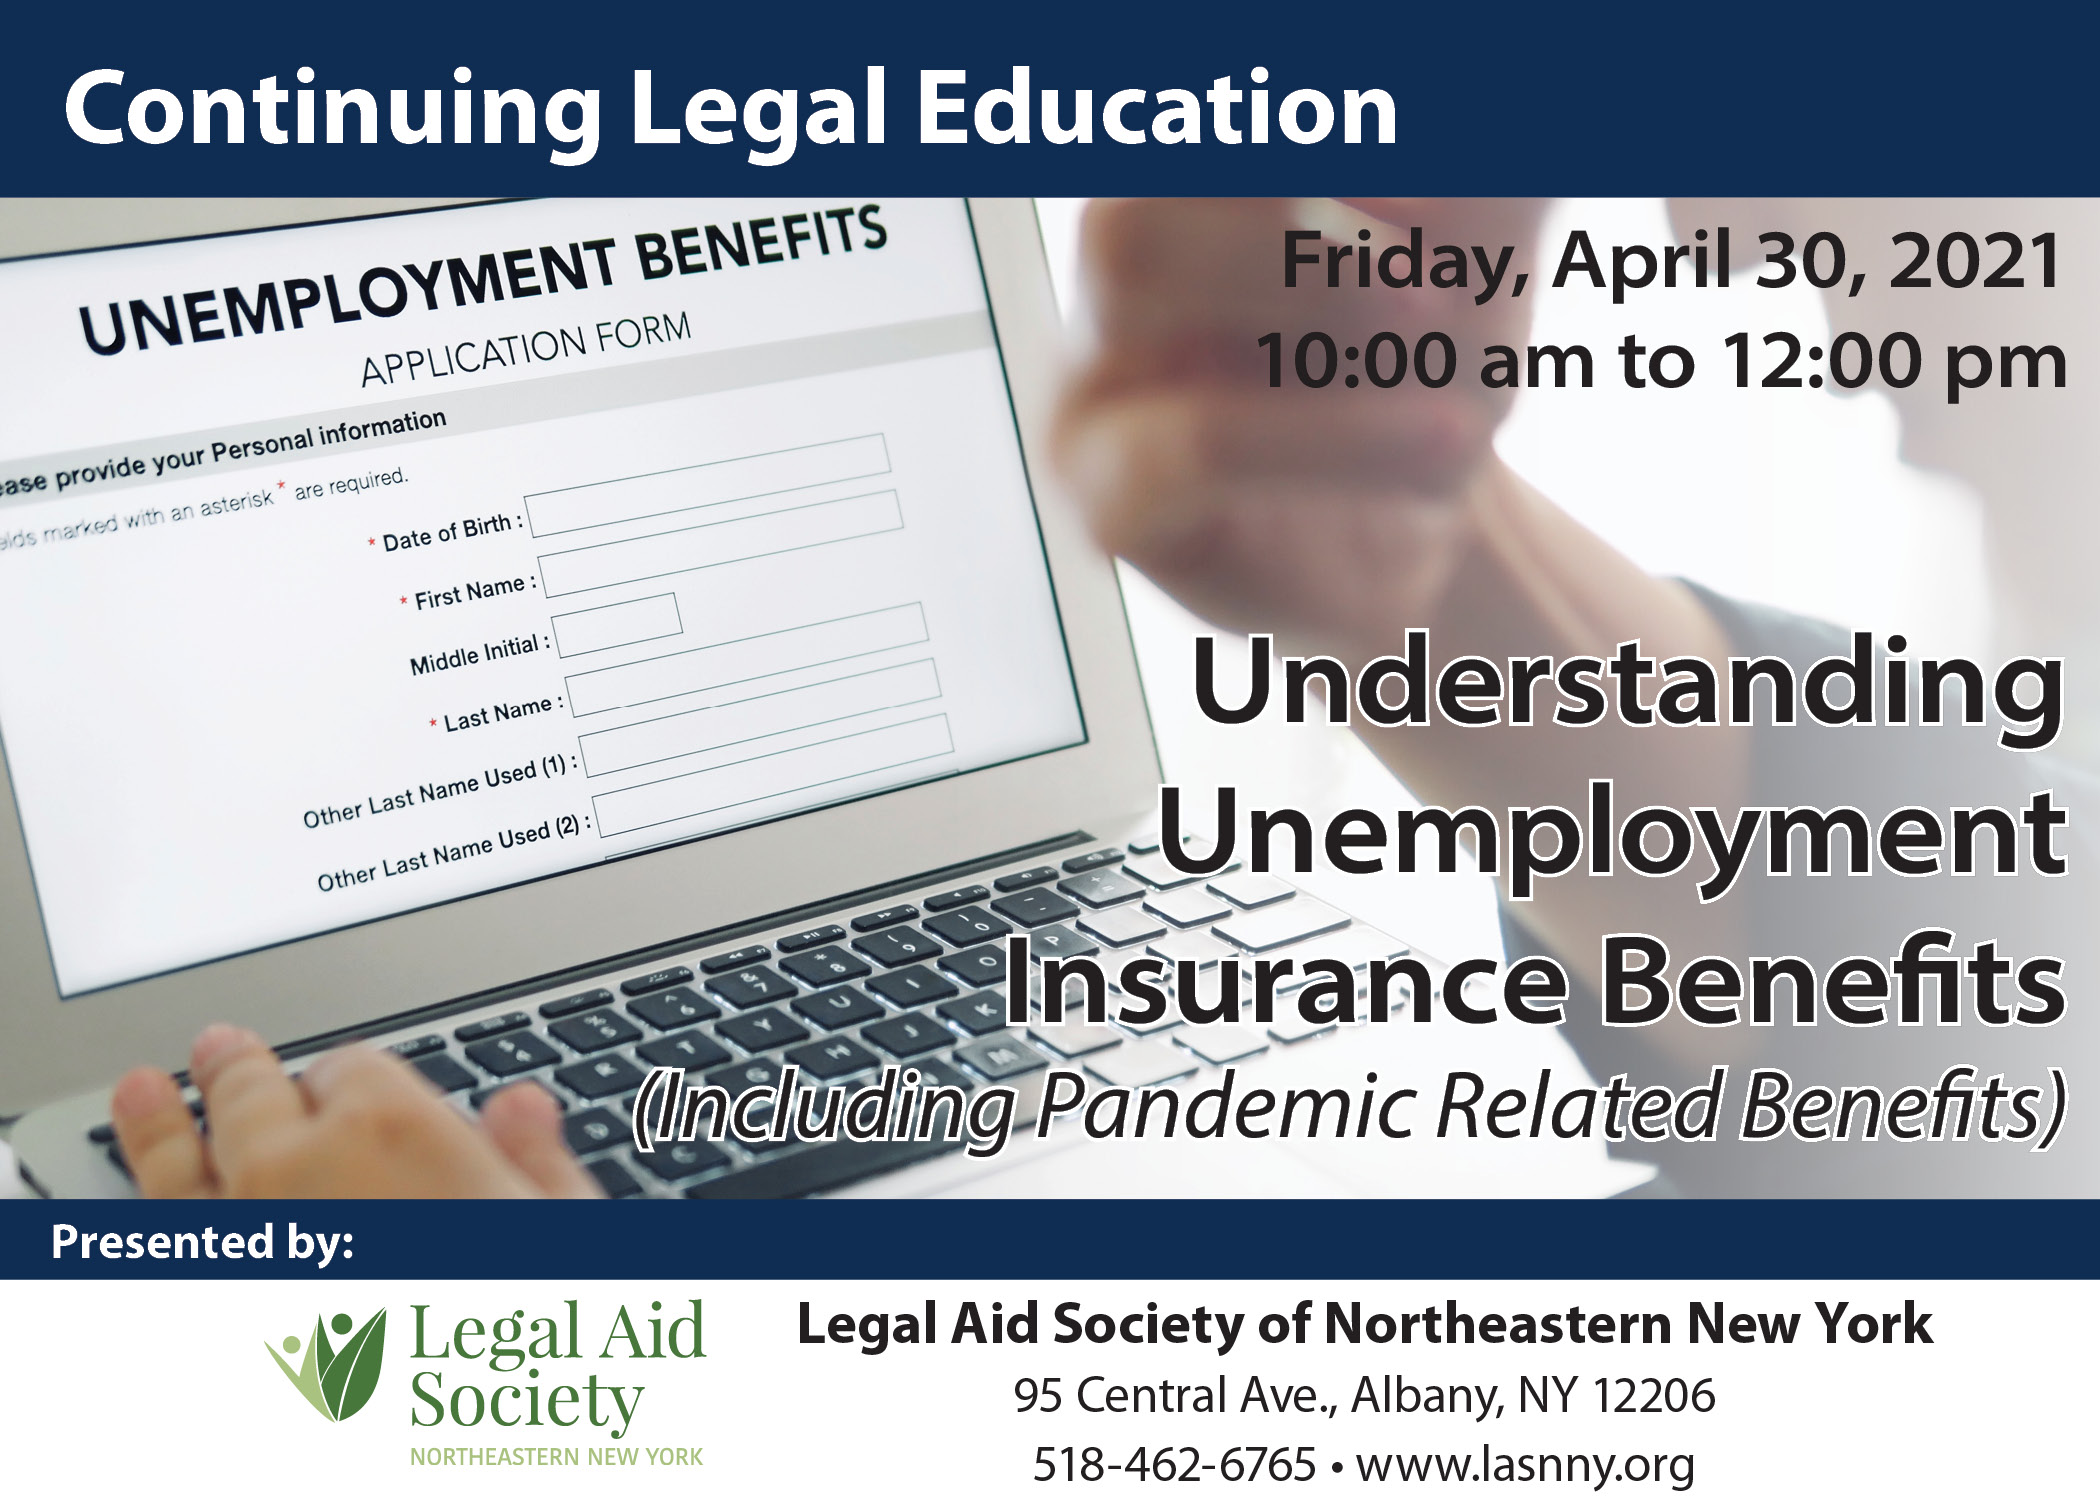 FREE Virtual CLE: Understanding Unemployment Benefits (Including Pandemic Related Benefits)